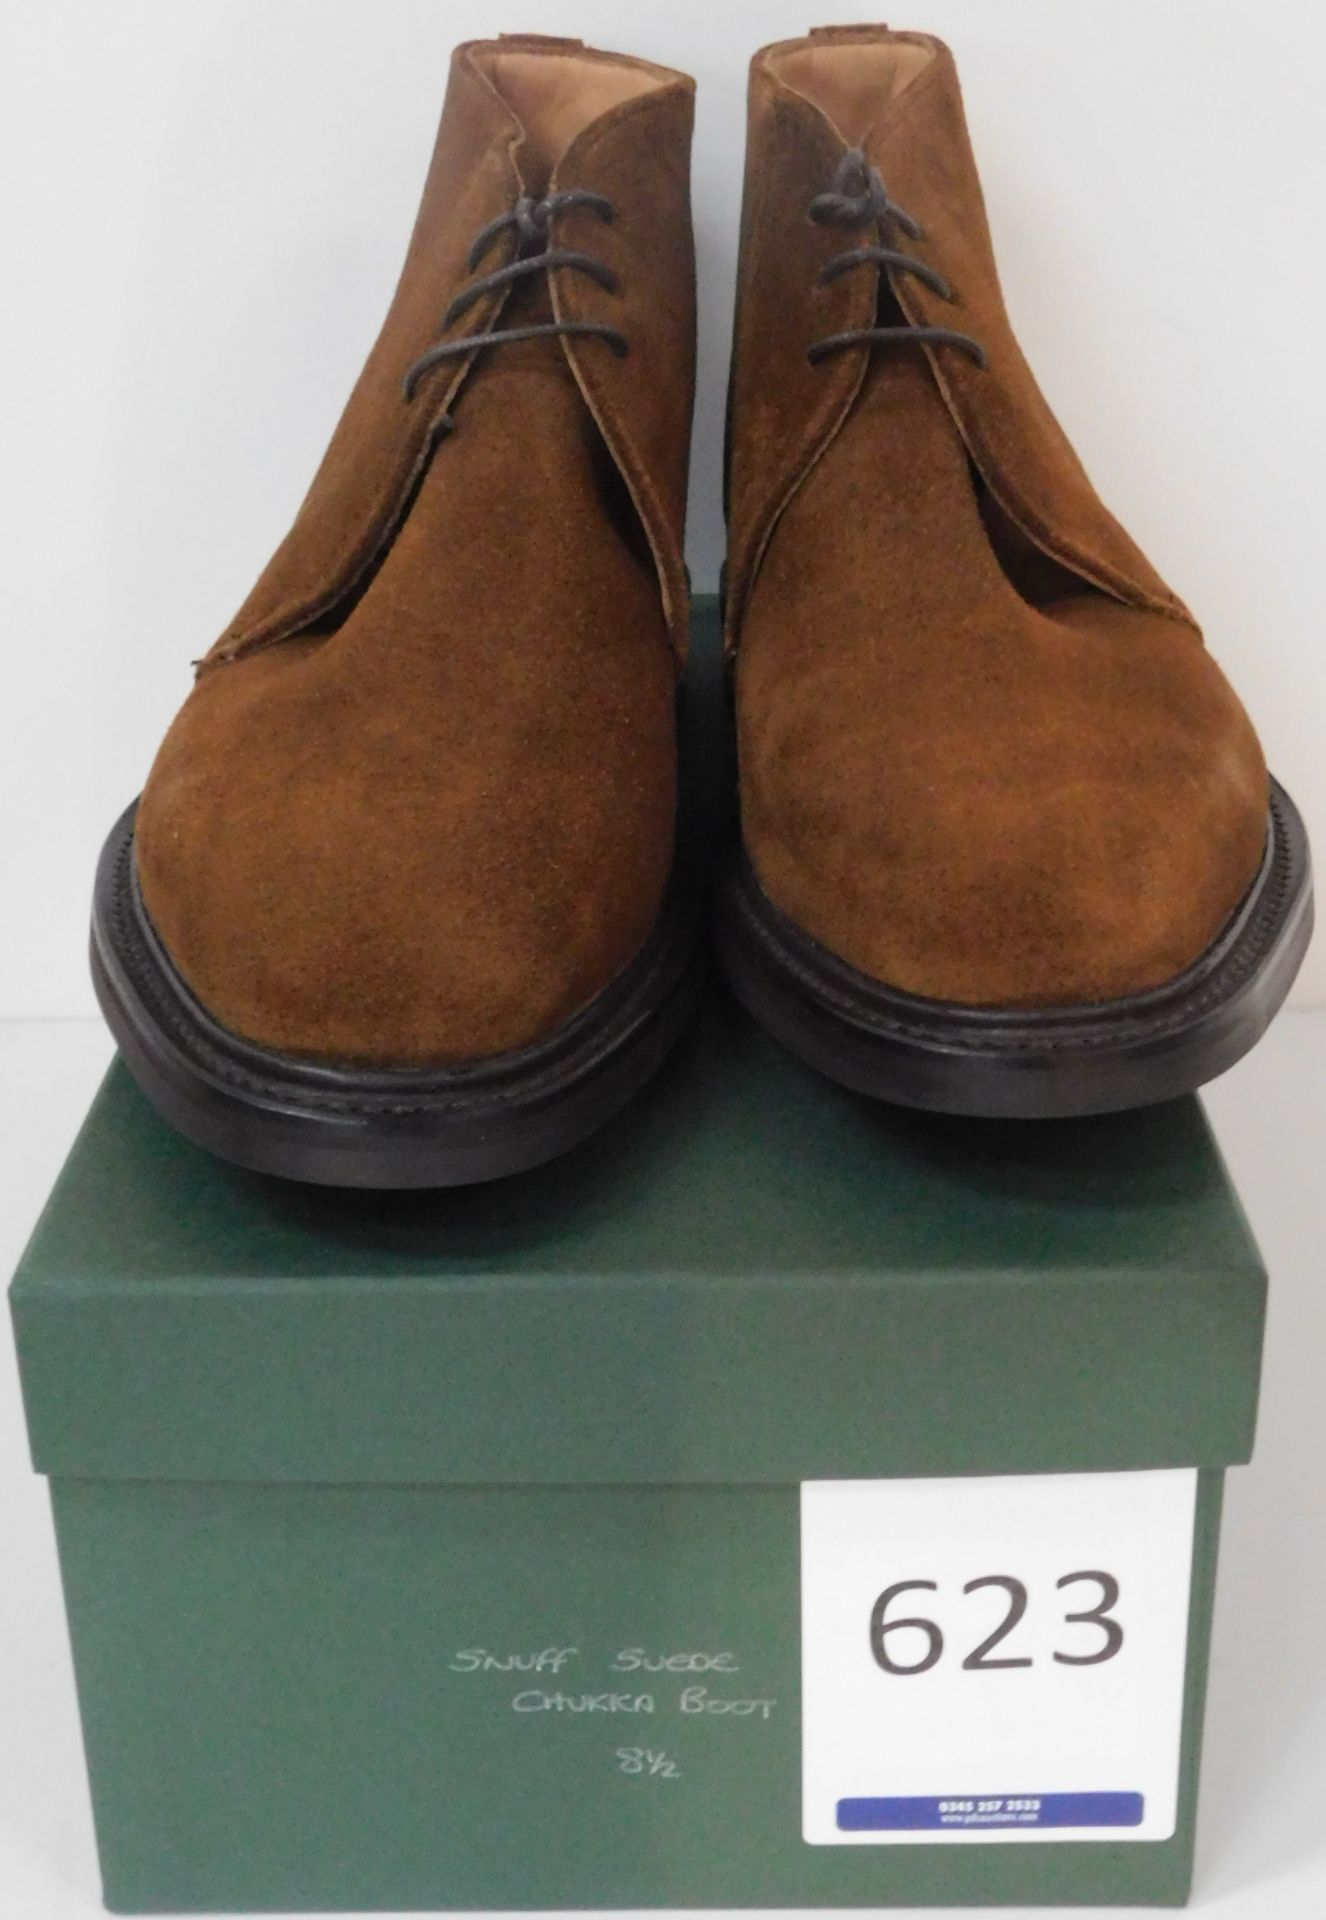 Sid Mashburn Snuff Suede Chukka Boot” Size 8.5 (Slight Seconds) (Location: Brentwood – See General